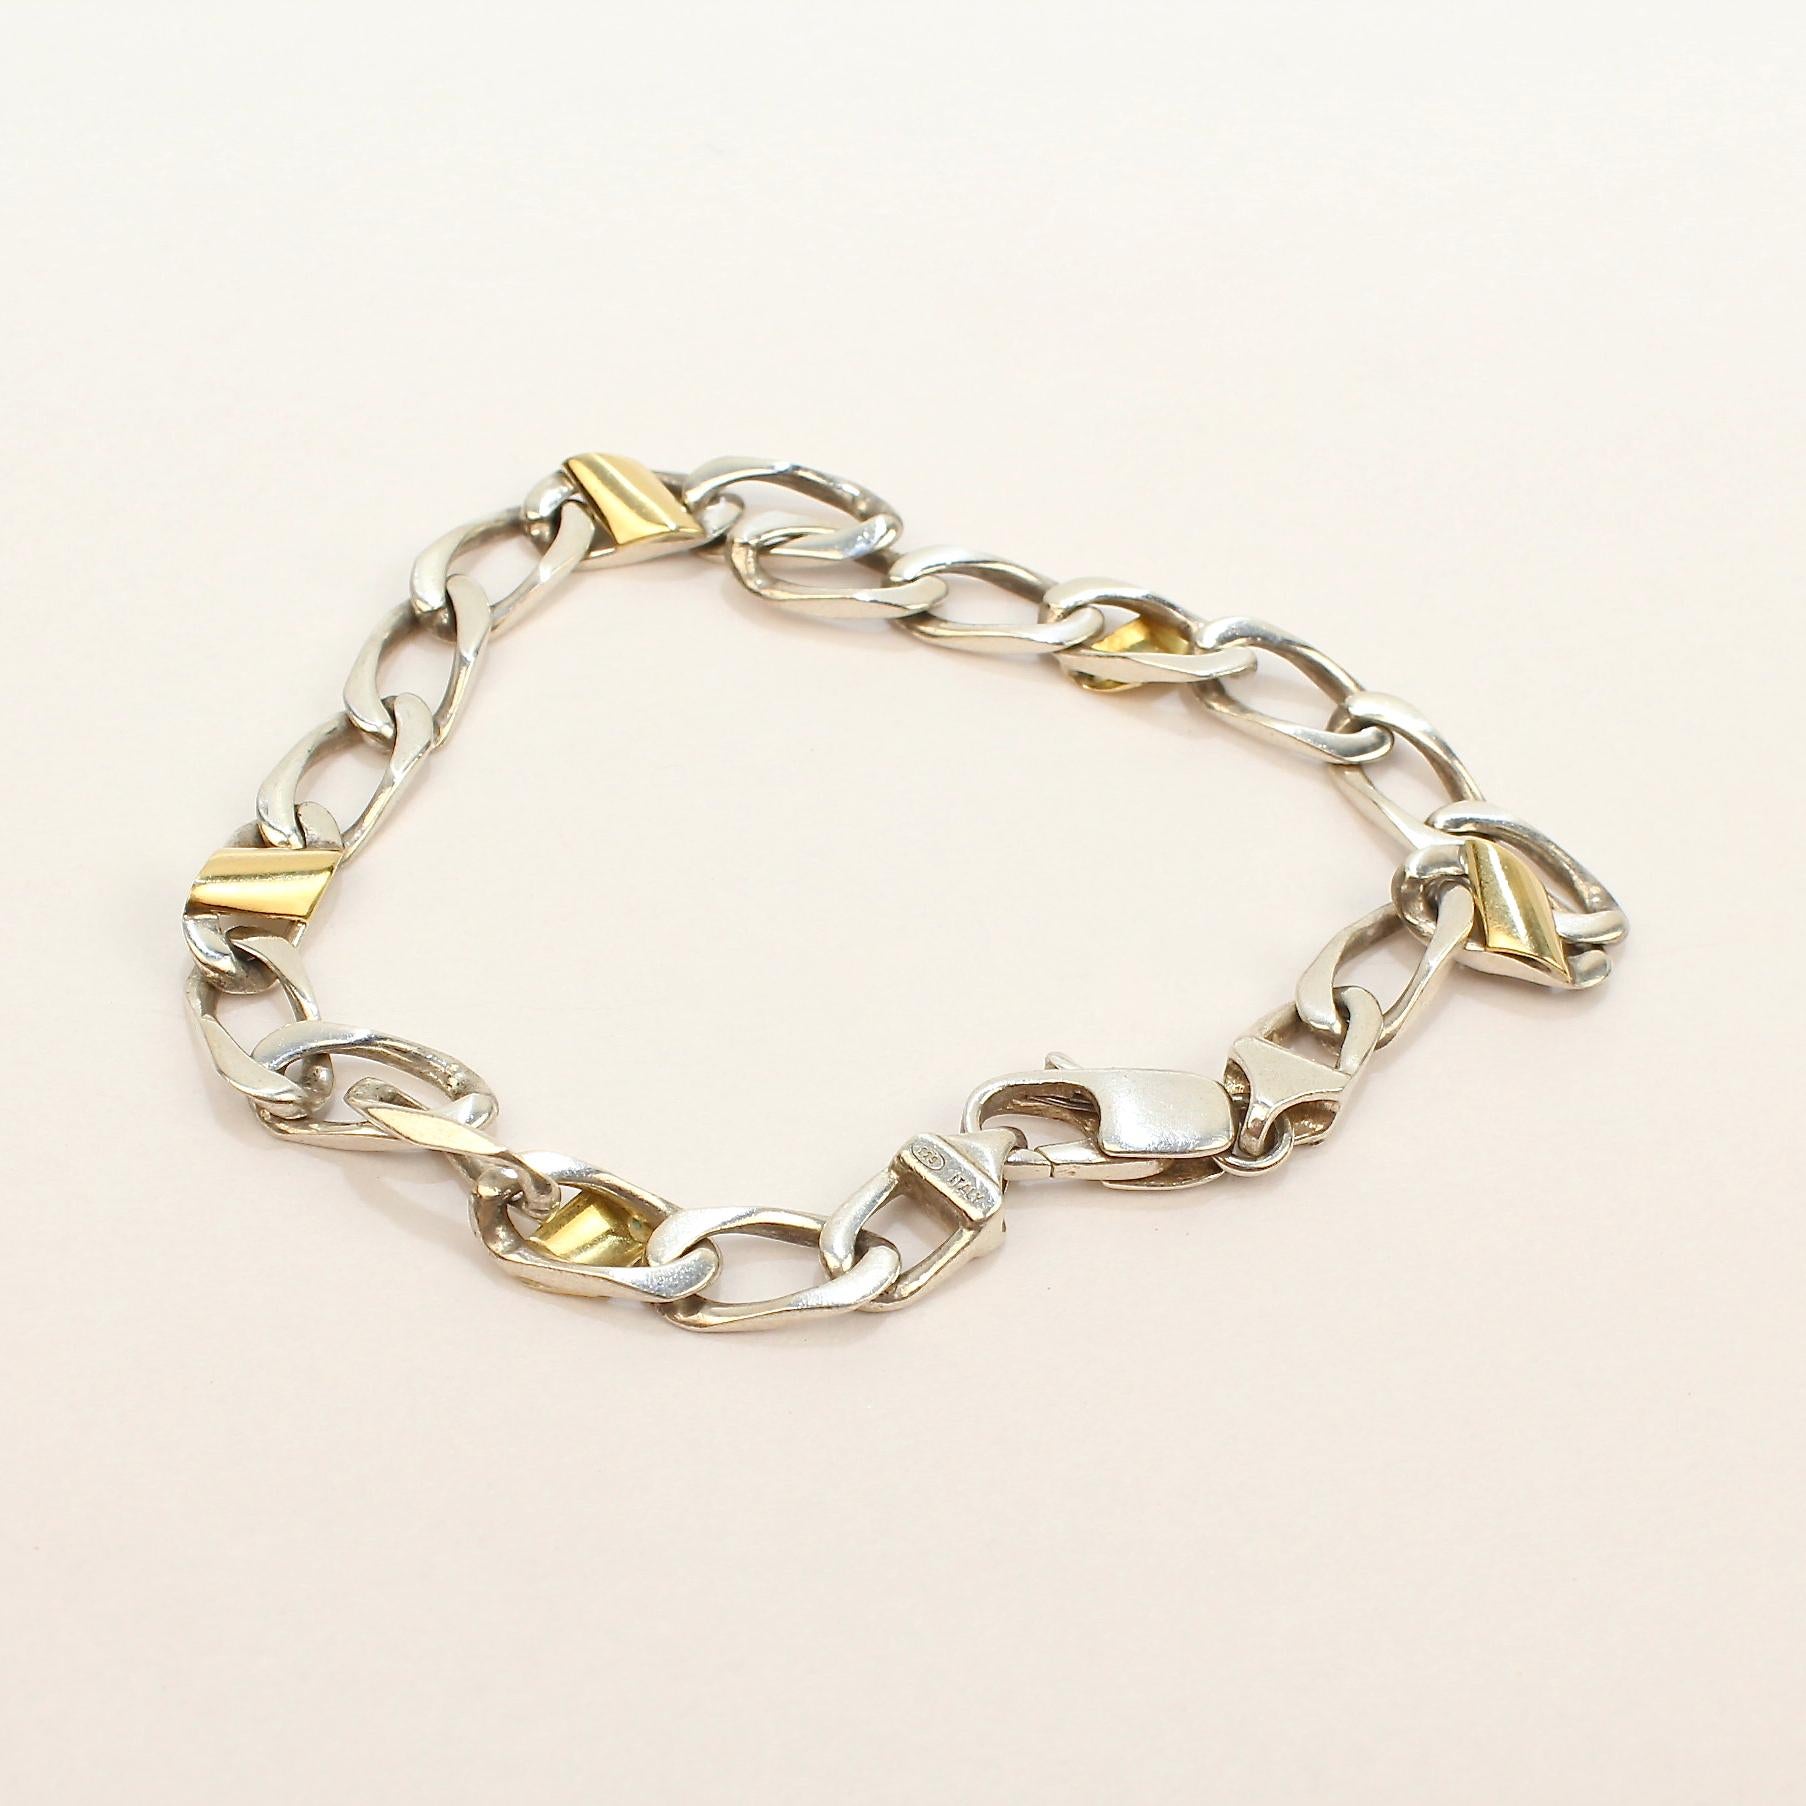 A fine Tiffany & Co. curb link bracelet

In sterling silver with 18k gold sections.

Great Tiffany design!

Date:
20th Century

Overall Condition:
It is in overall good, as-pictured, used estate condition with some very fine & light surface